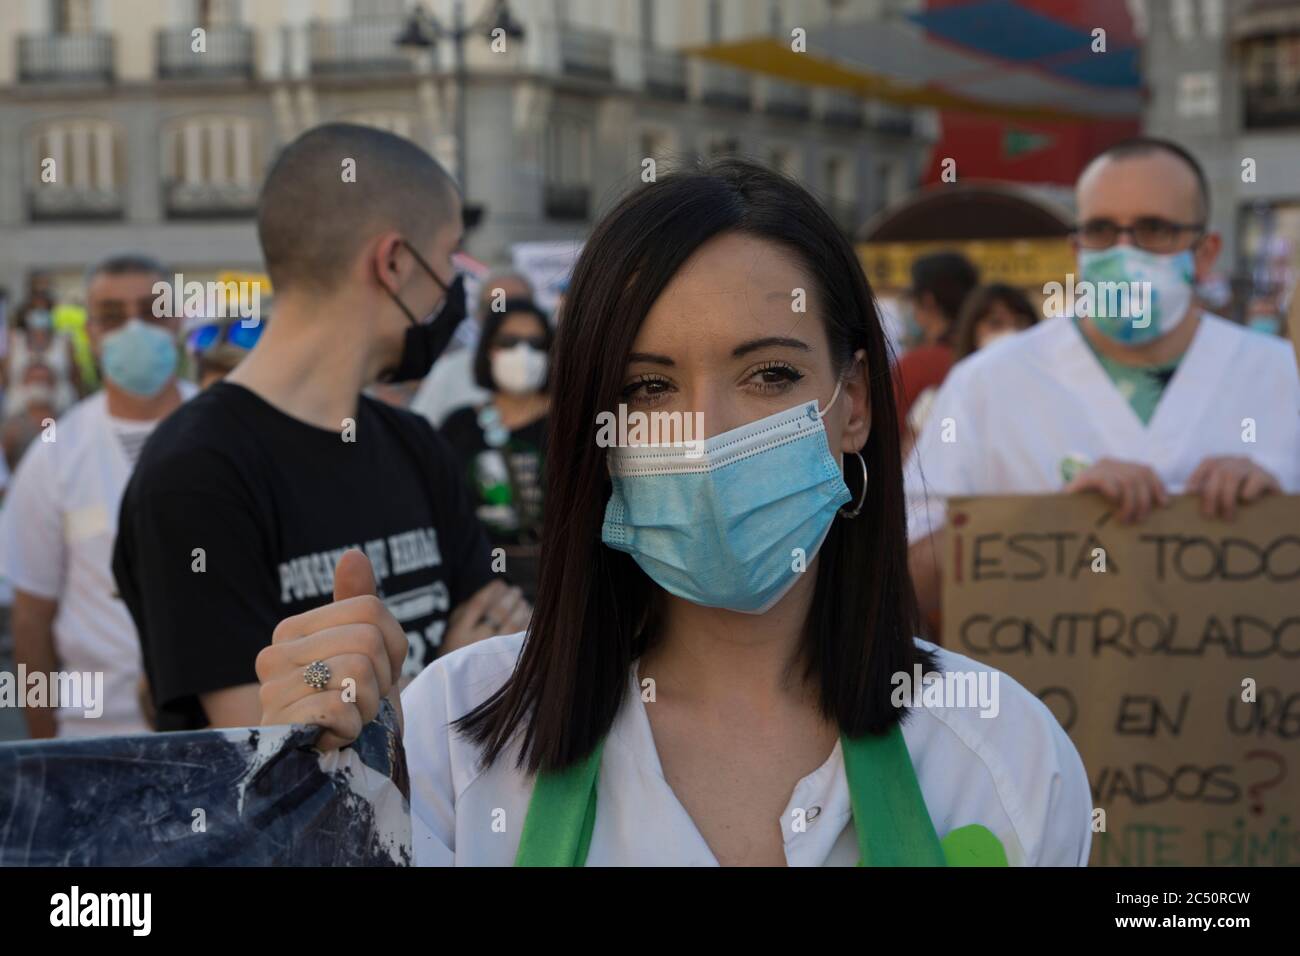 Hundreds of people have gathered at a gathering in Puerta del Sol in Madrid, Spain for protests against the privatization of public health in which he Stock Photo